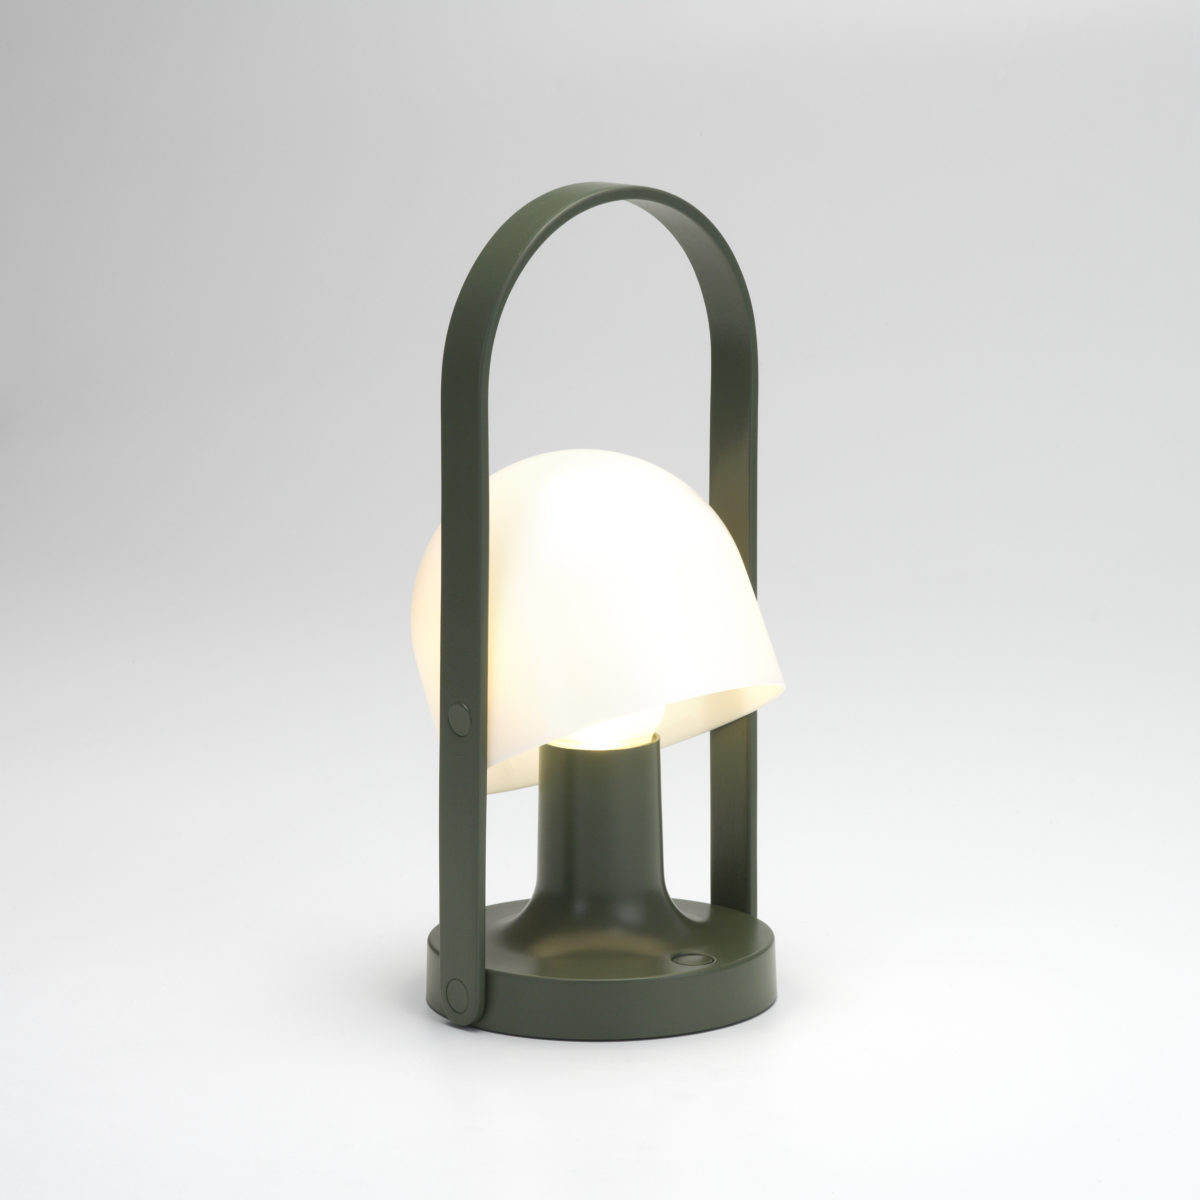 FollowMe Lamp - Official Store - Marset Store